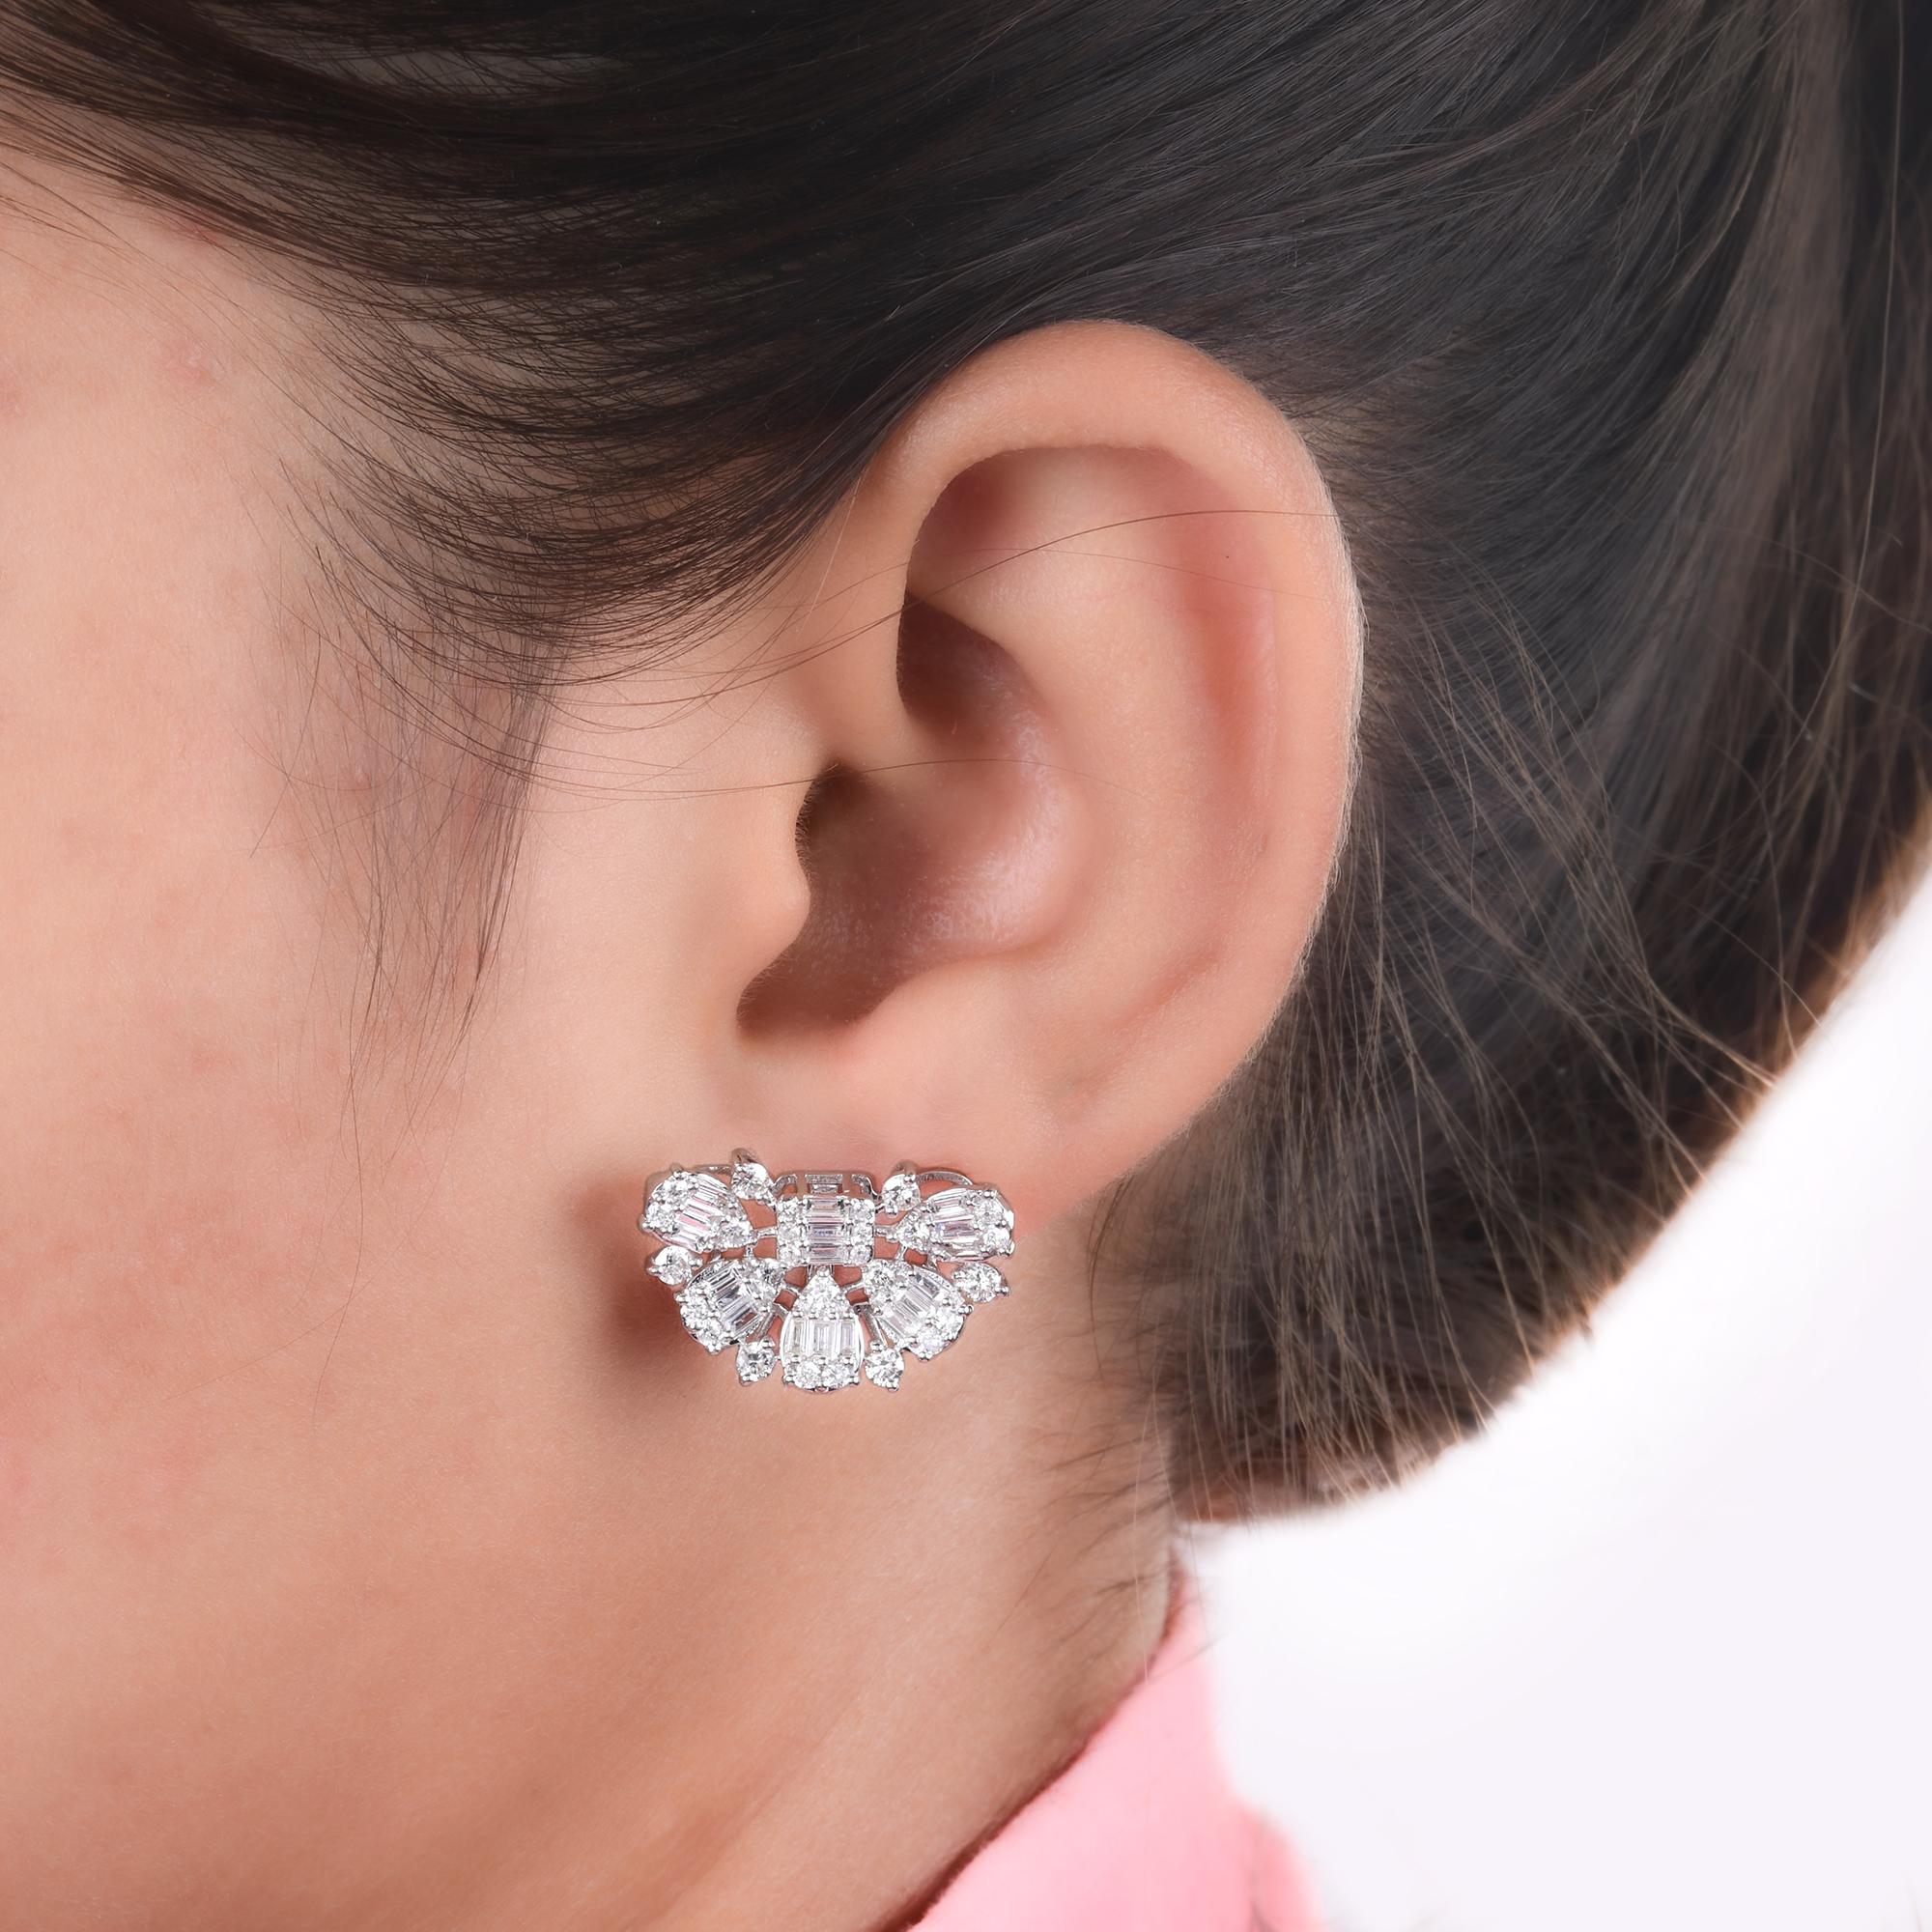 The half-moon design refers to the shape of the earrings, resembling a crescent moon. This design can vary, but generally, it features a curved or tapered arrangement of baguette diamonds, creating an elegant and eye-catching silhouette.

Item Code